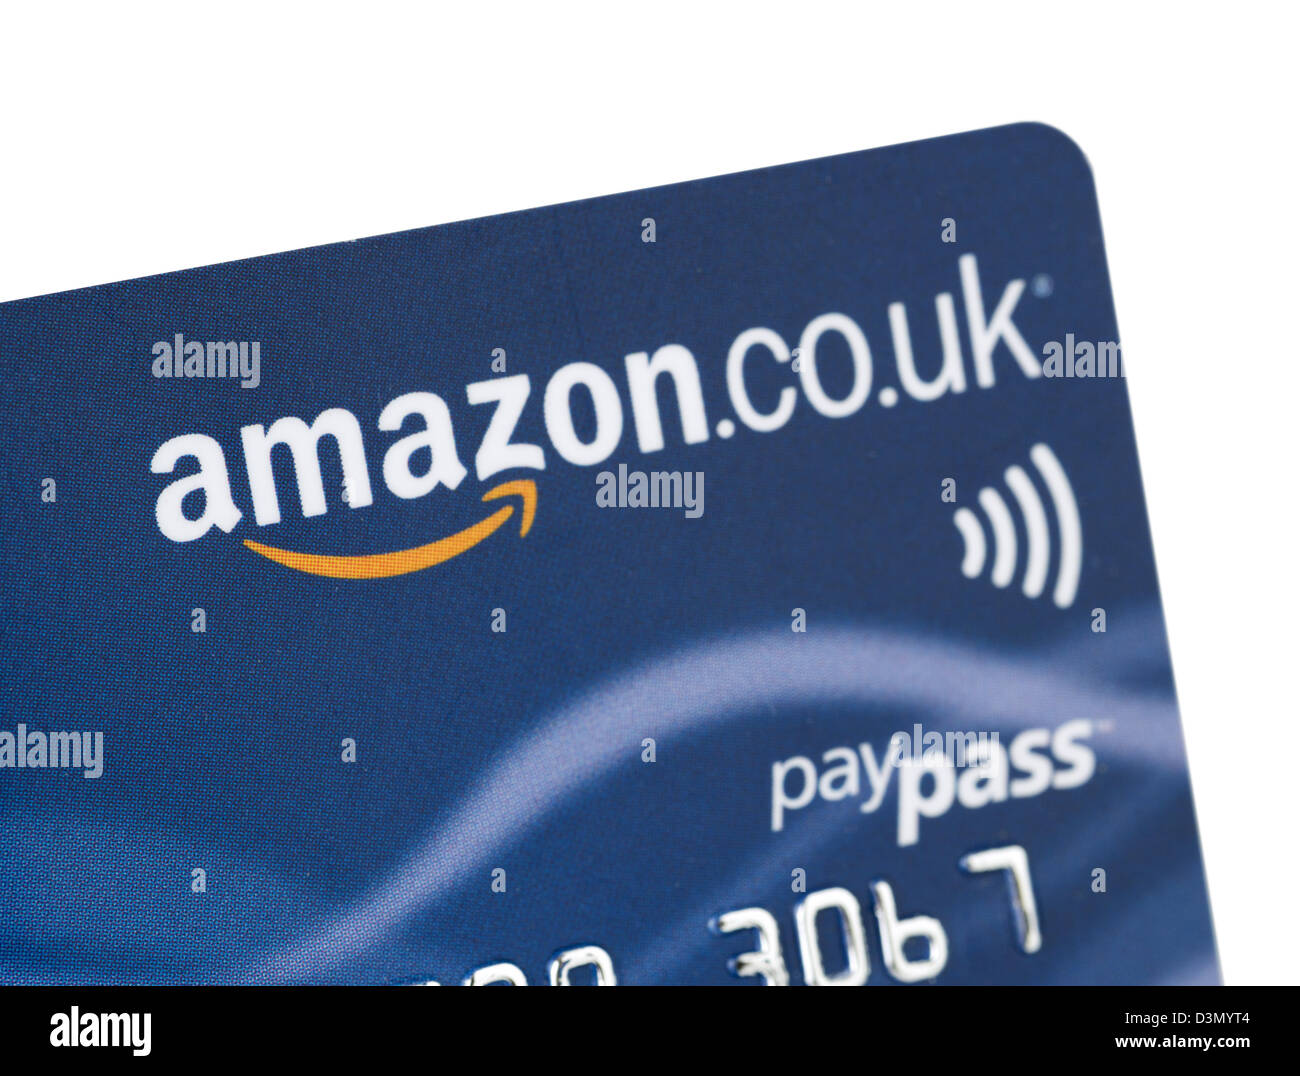 Amazon.co.uk branded credit card issued in the UK Stock Photo